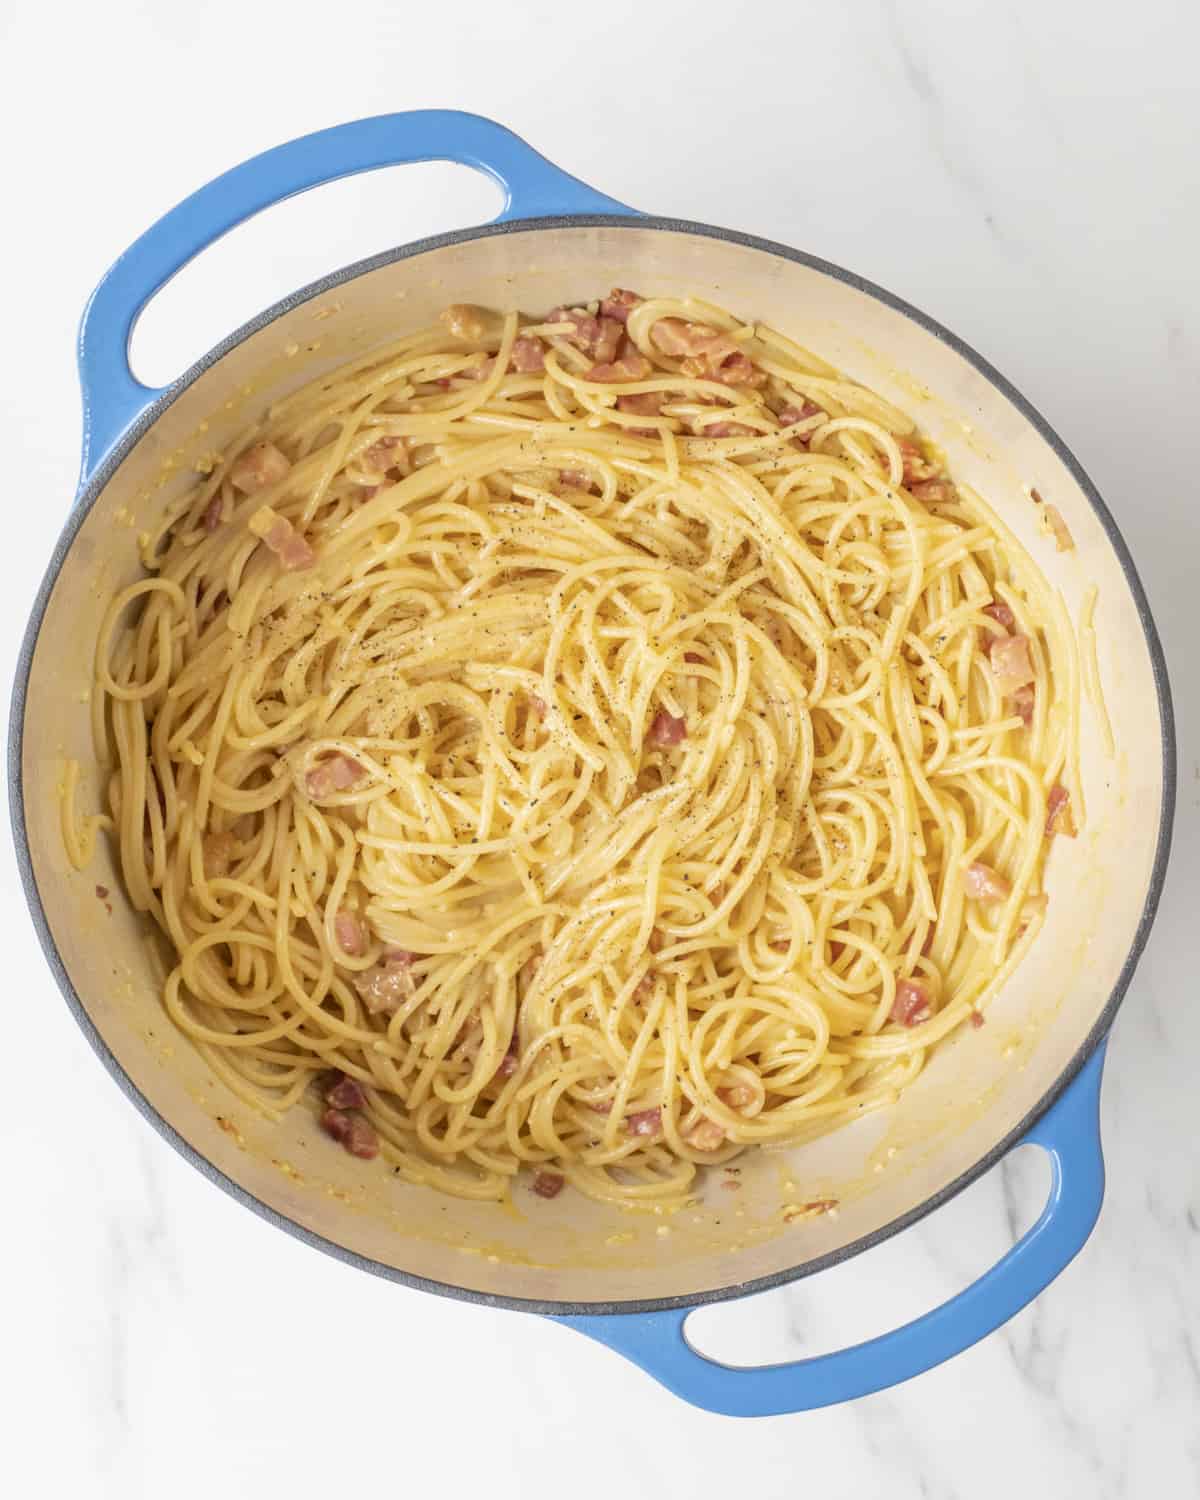 A blue Dutch oven skillet with the completed Spaghetti Carbonara recipe.